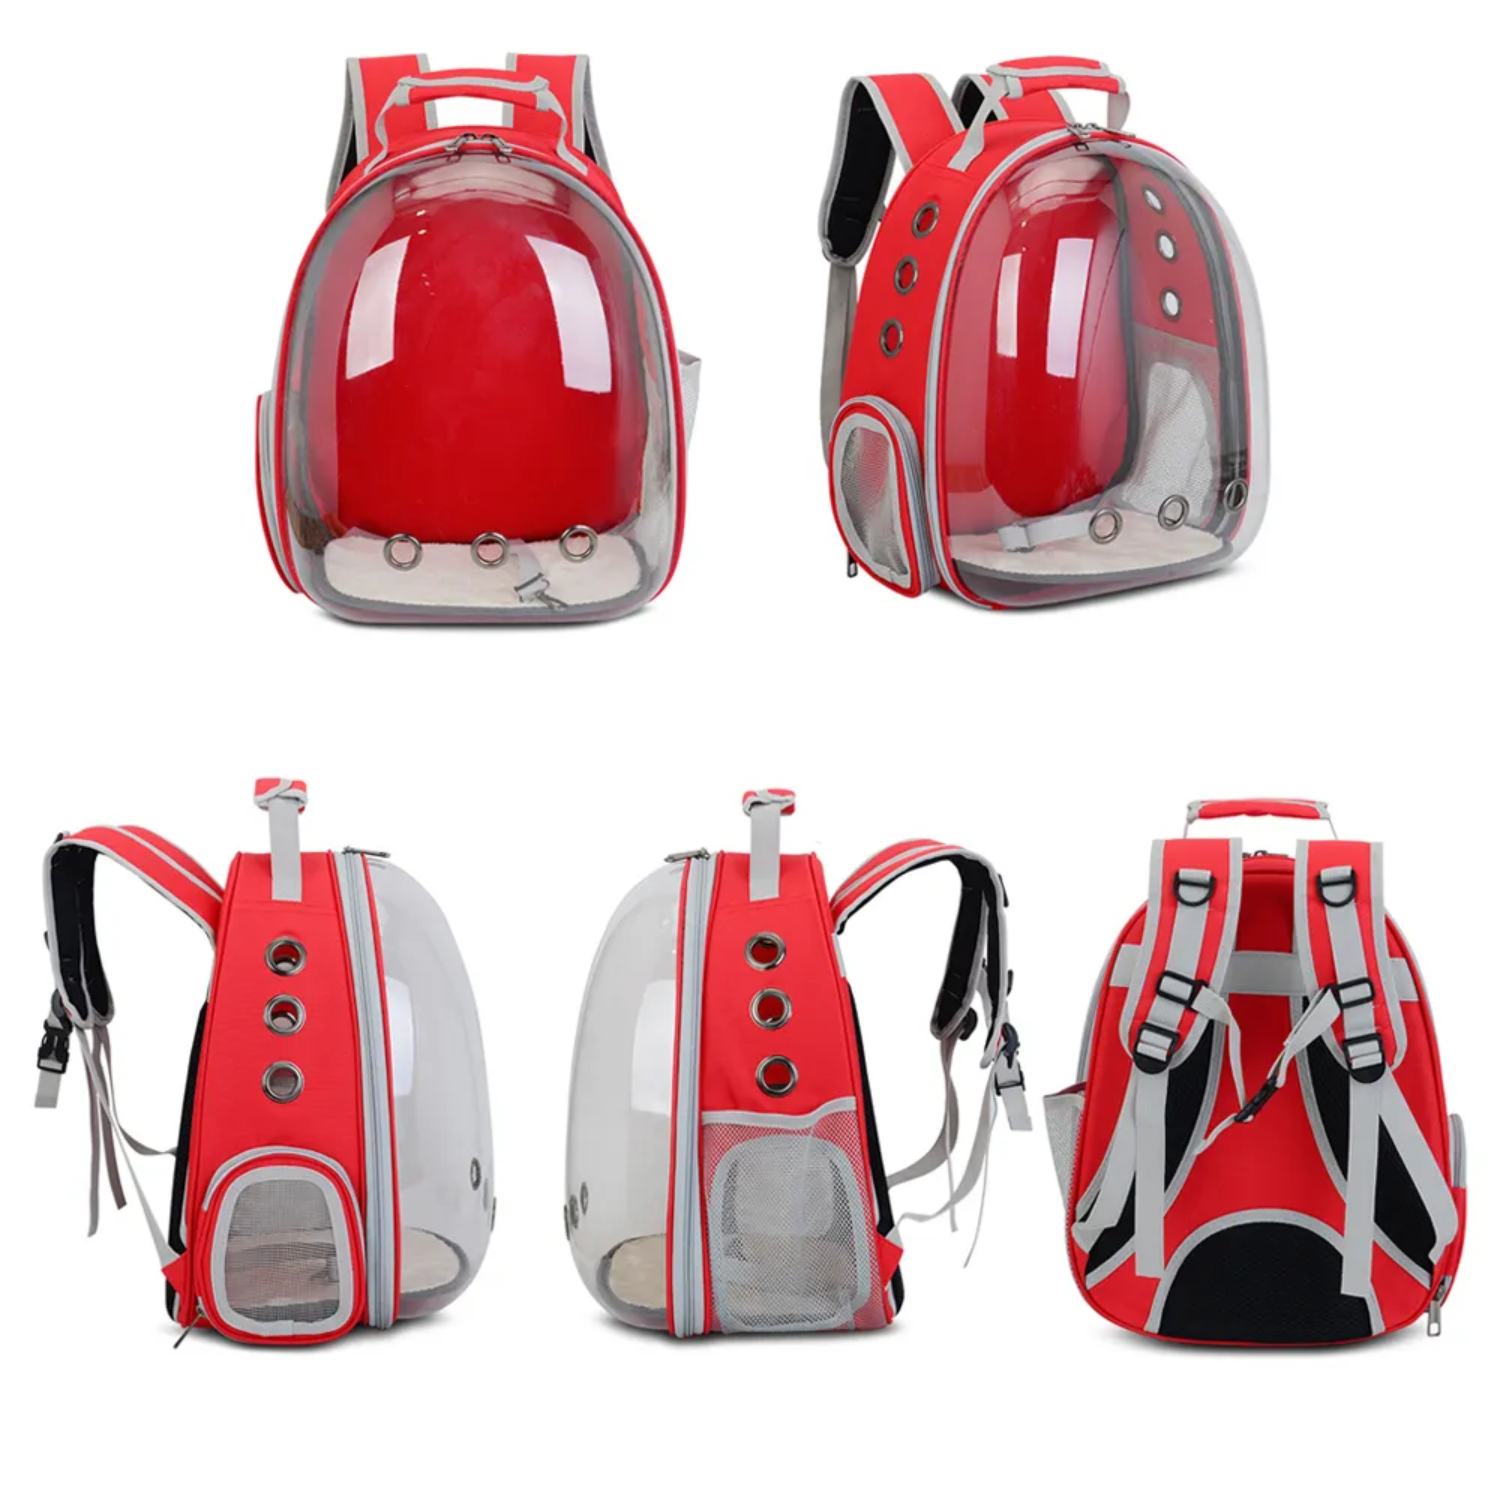 Floofi Expandable Space Capsule Backpack - Model 1 (Red)